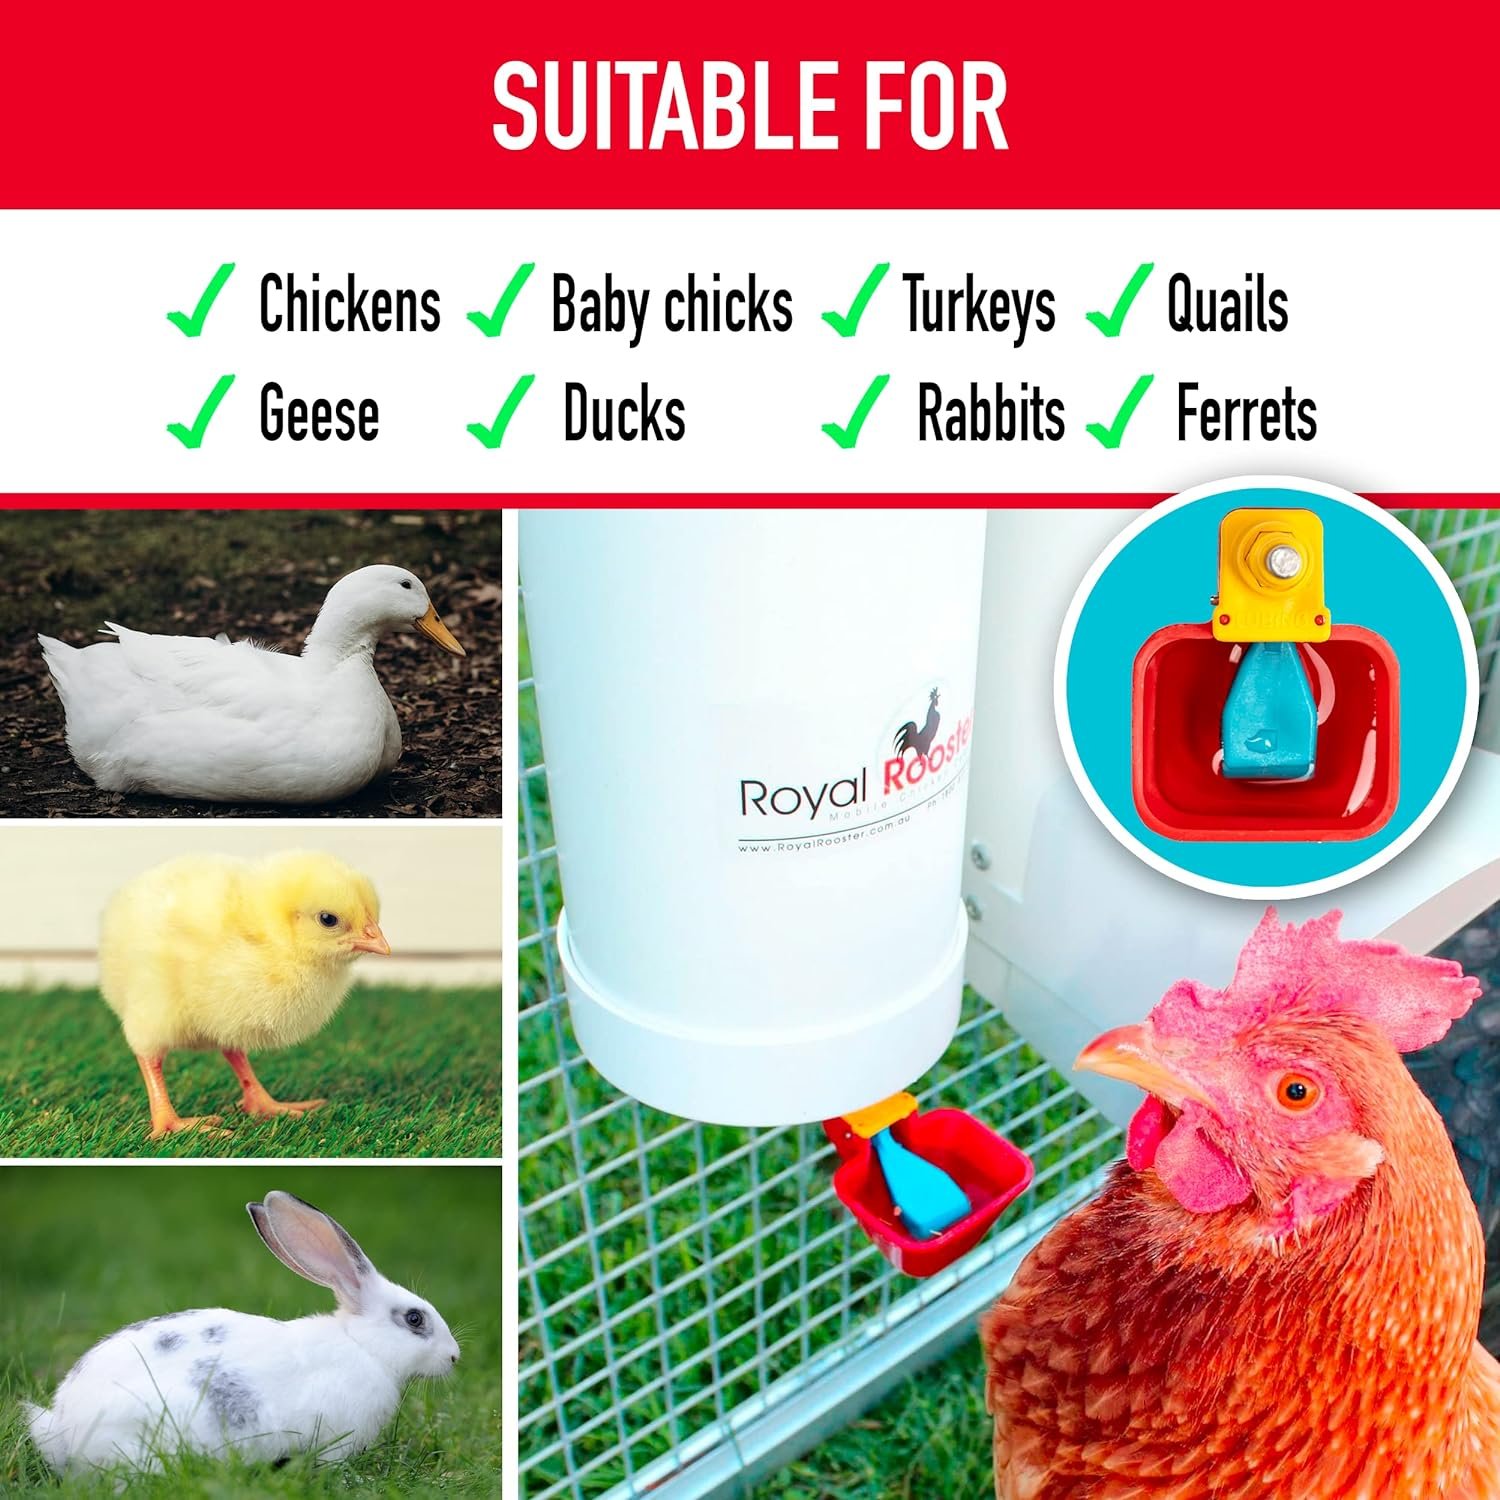 Royal Rooster 1 Gallon Automatic Chicken Waterer with 1 Gravity-Feed Valve-Operated Cup - Indoor and Outdoor Hanging Chicken, Duck and Poultry Water Dispensing System with Drinking Cup for The Coop